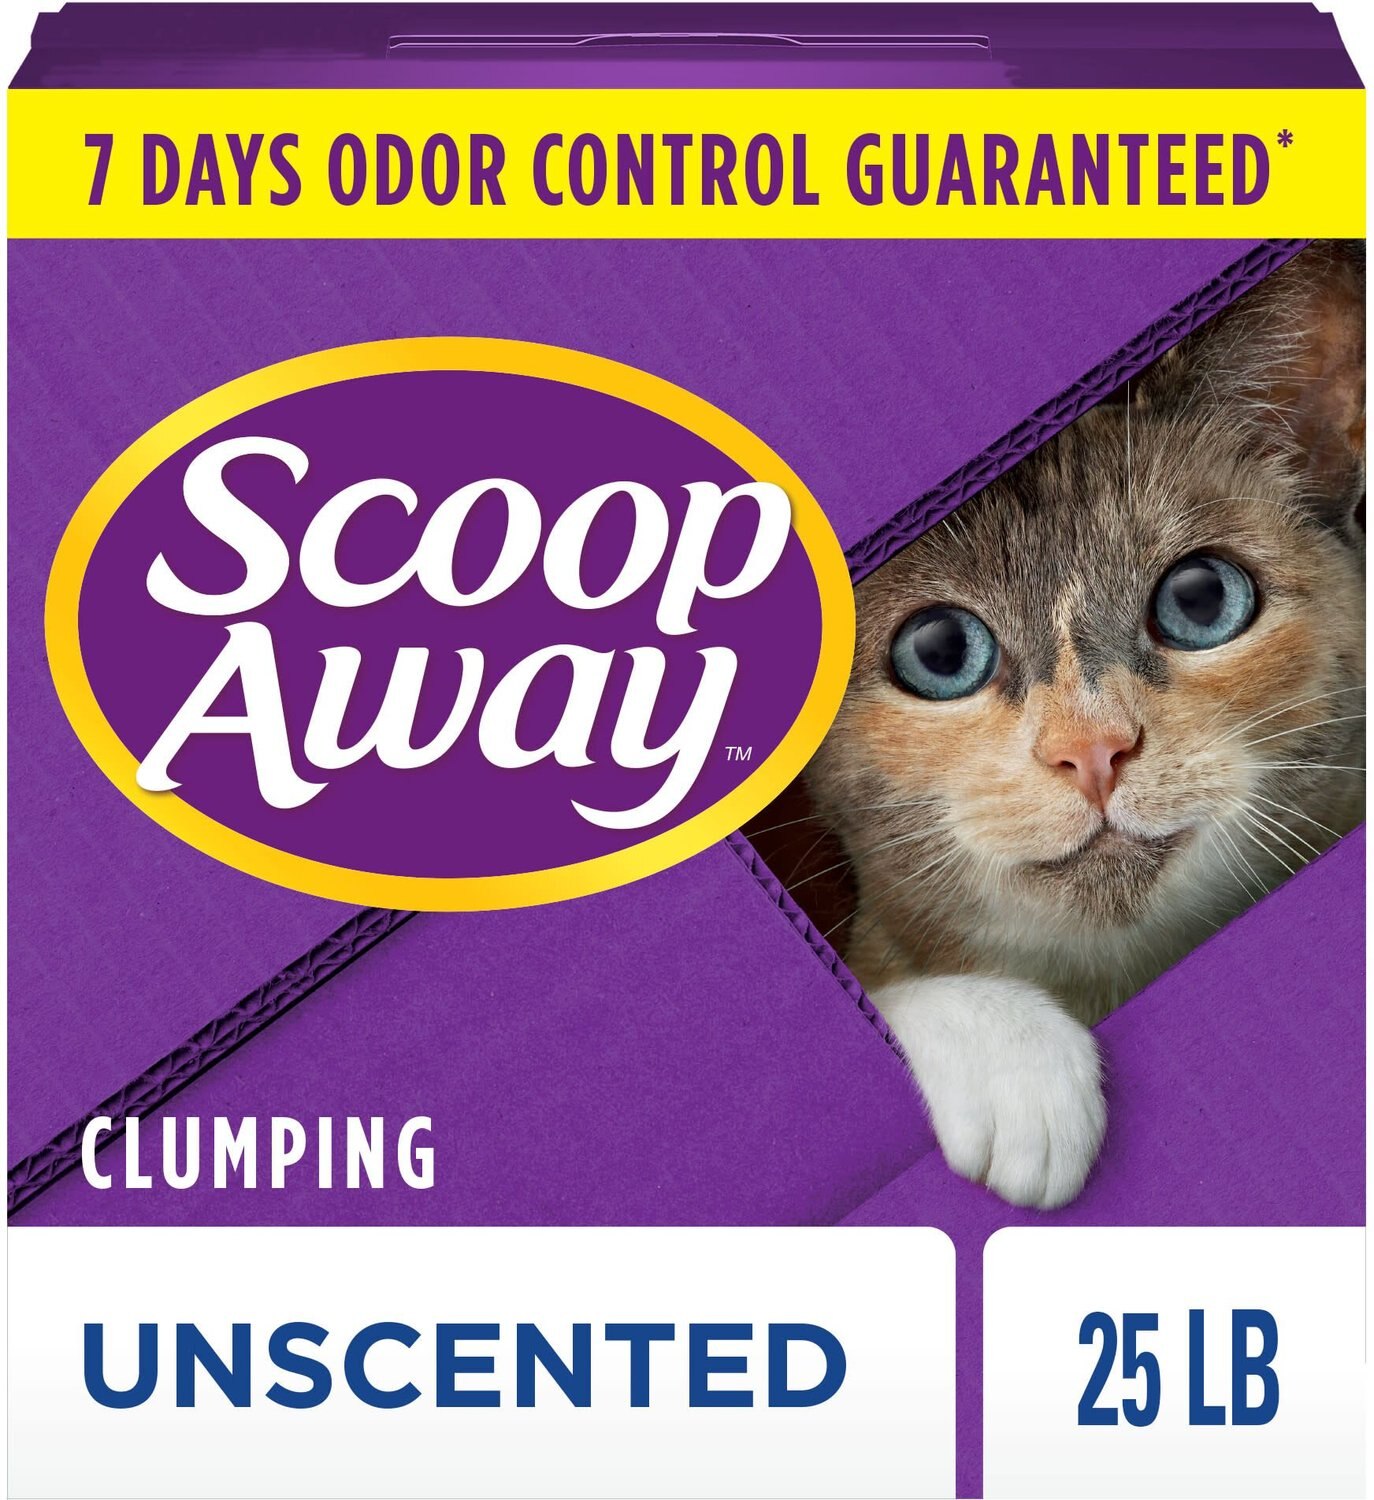 Scoop Away Unscented Clumping Clay Cat Litter, 25-lb box By Scoop Away
